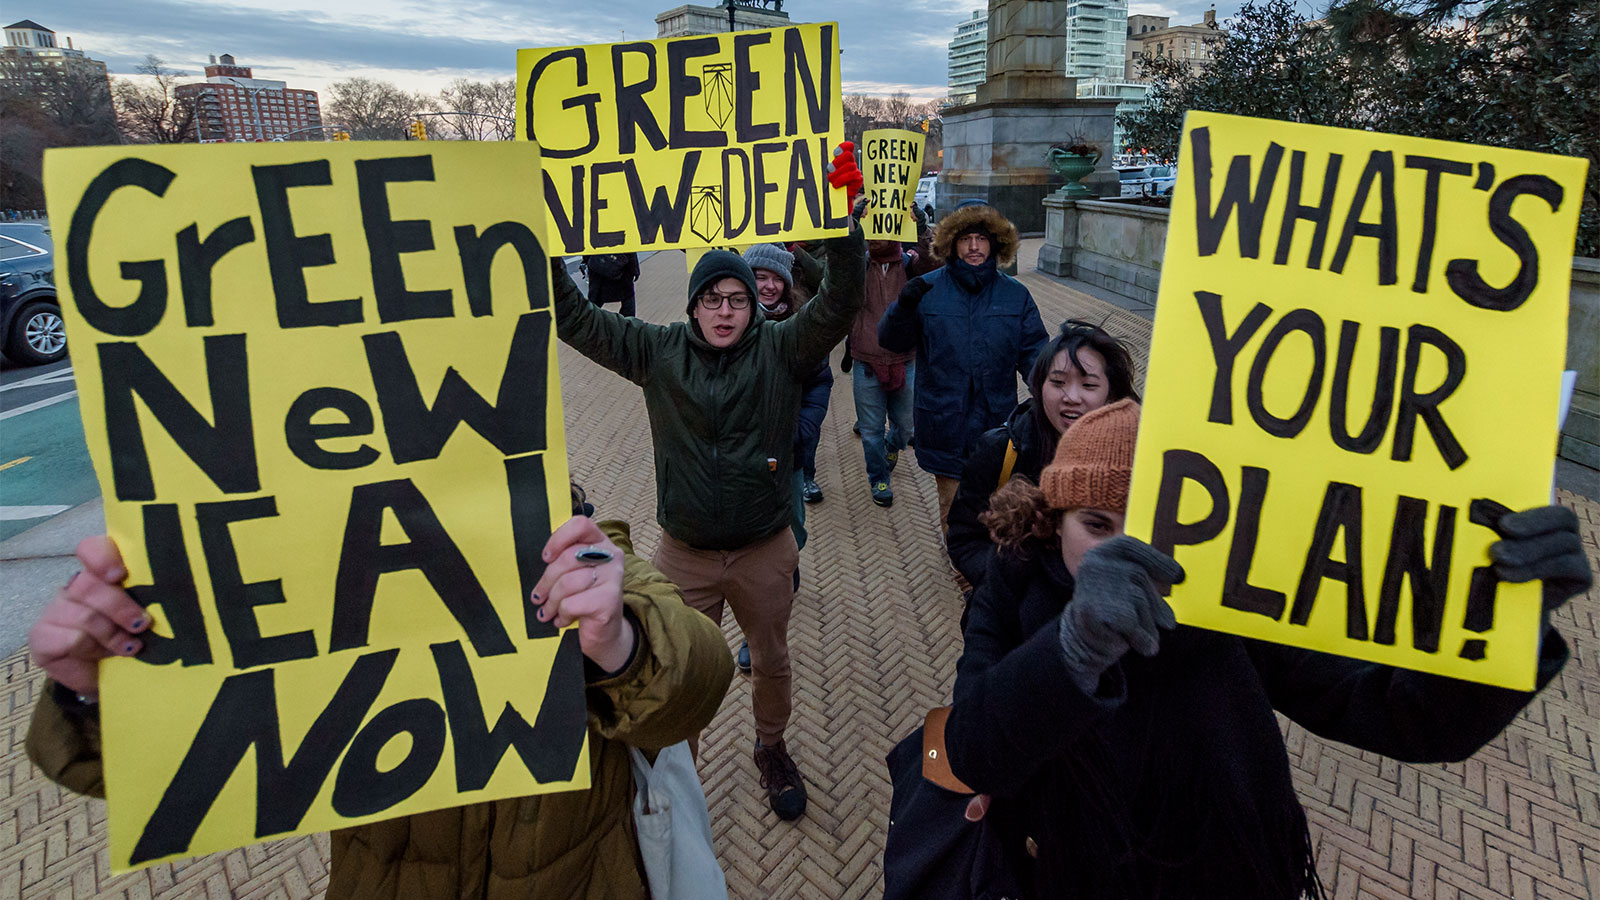 Green New Deal supporters hold signs encouraging action on climate change.